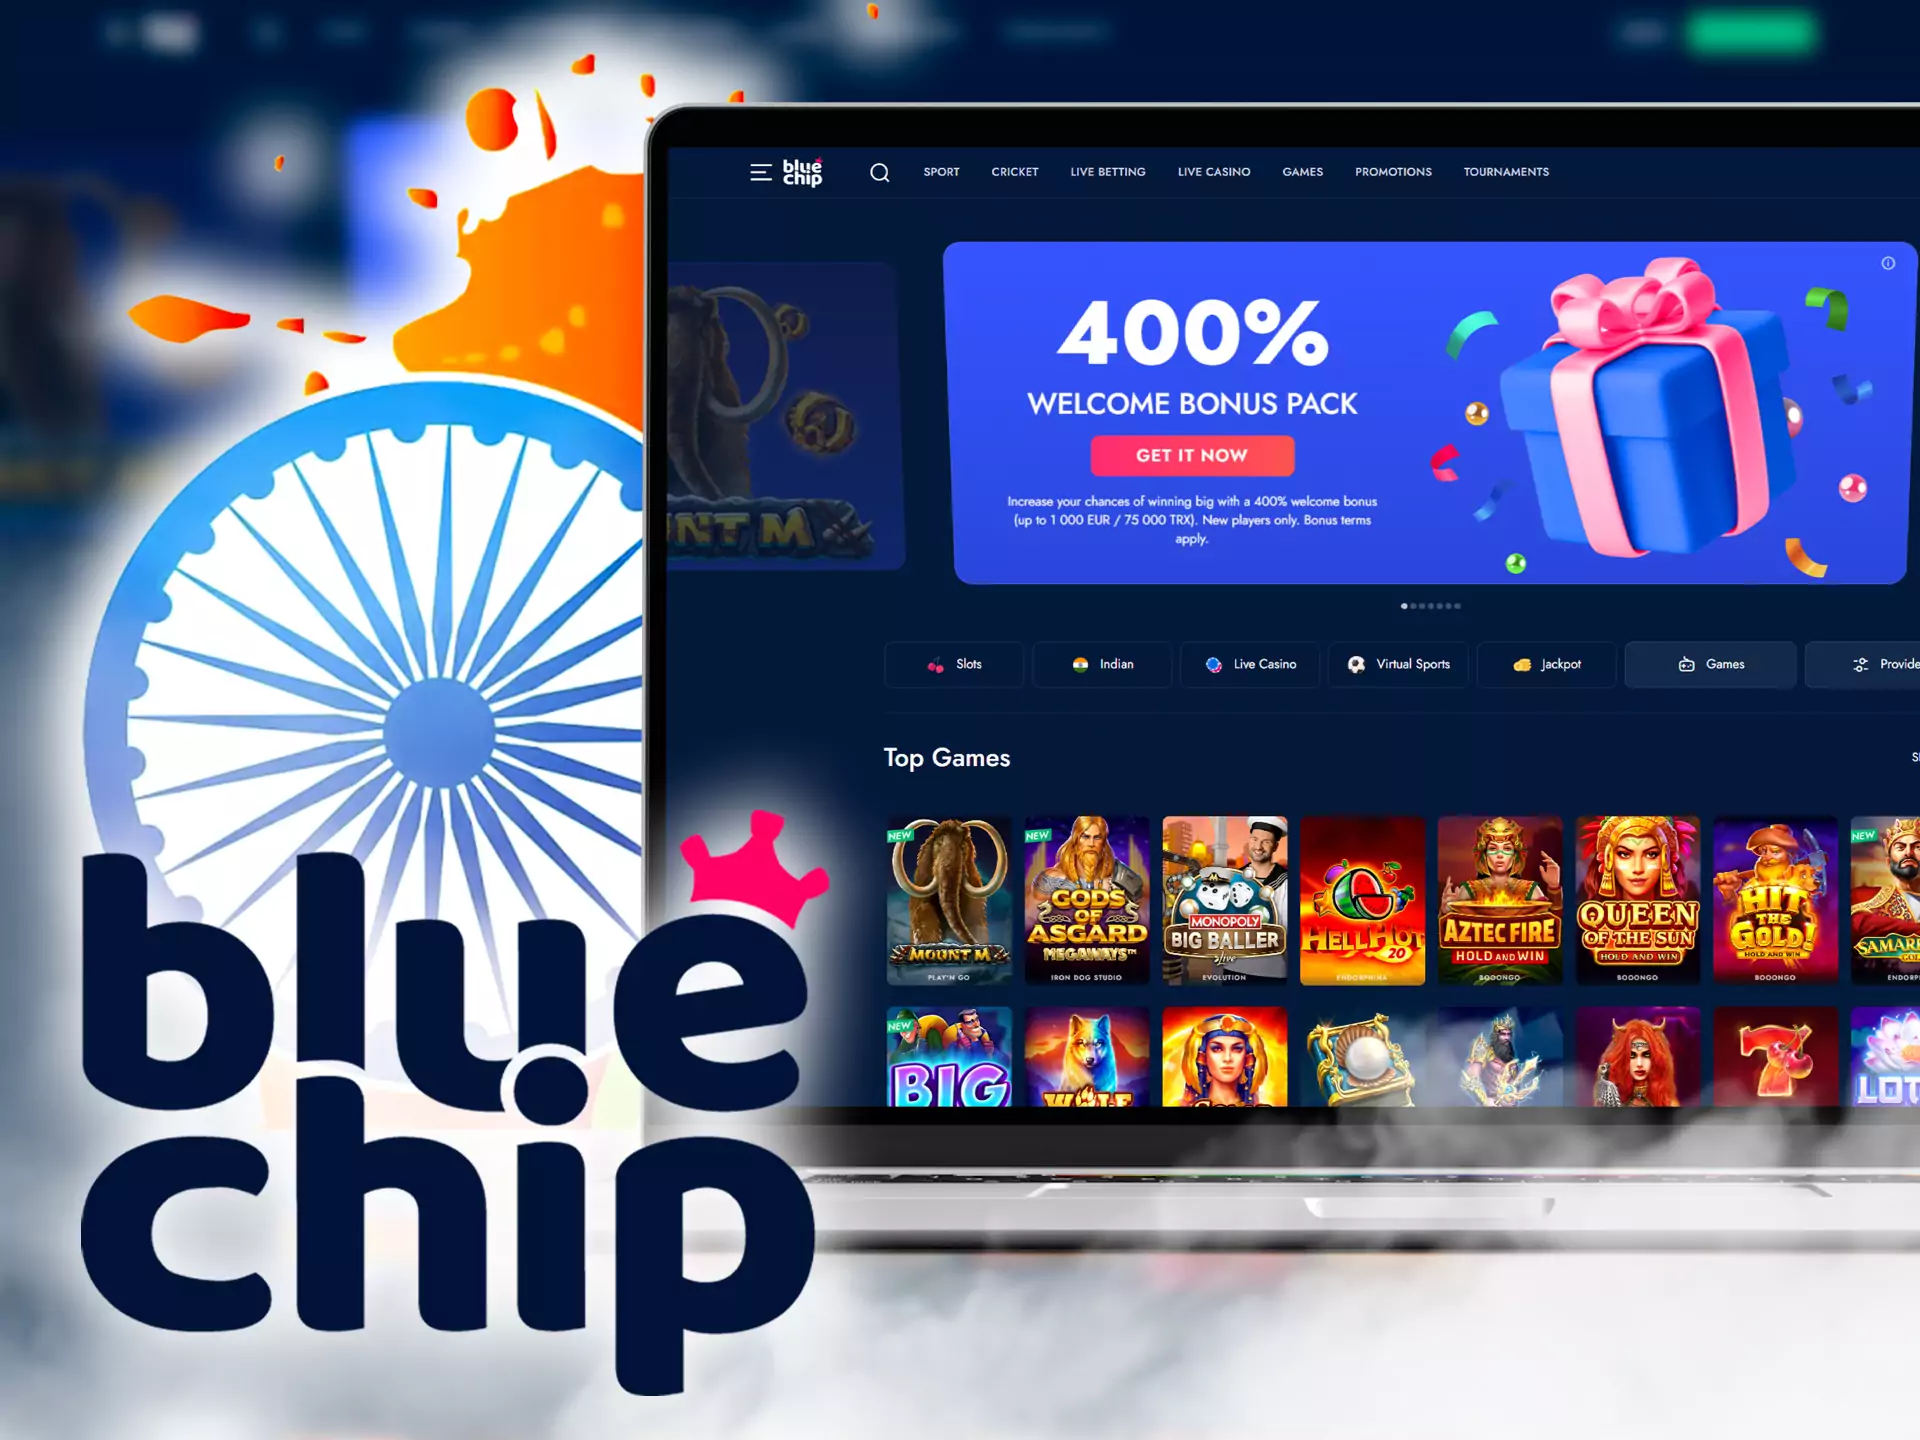 The Bluechip website works in India legally online.